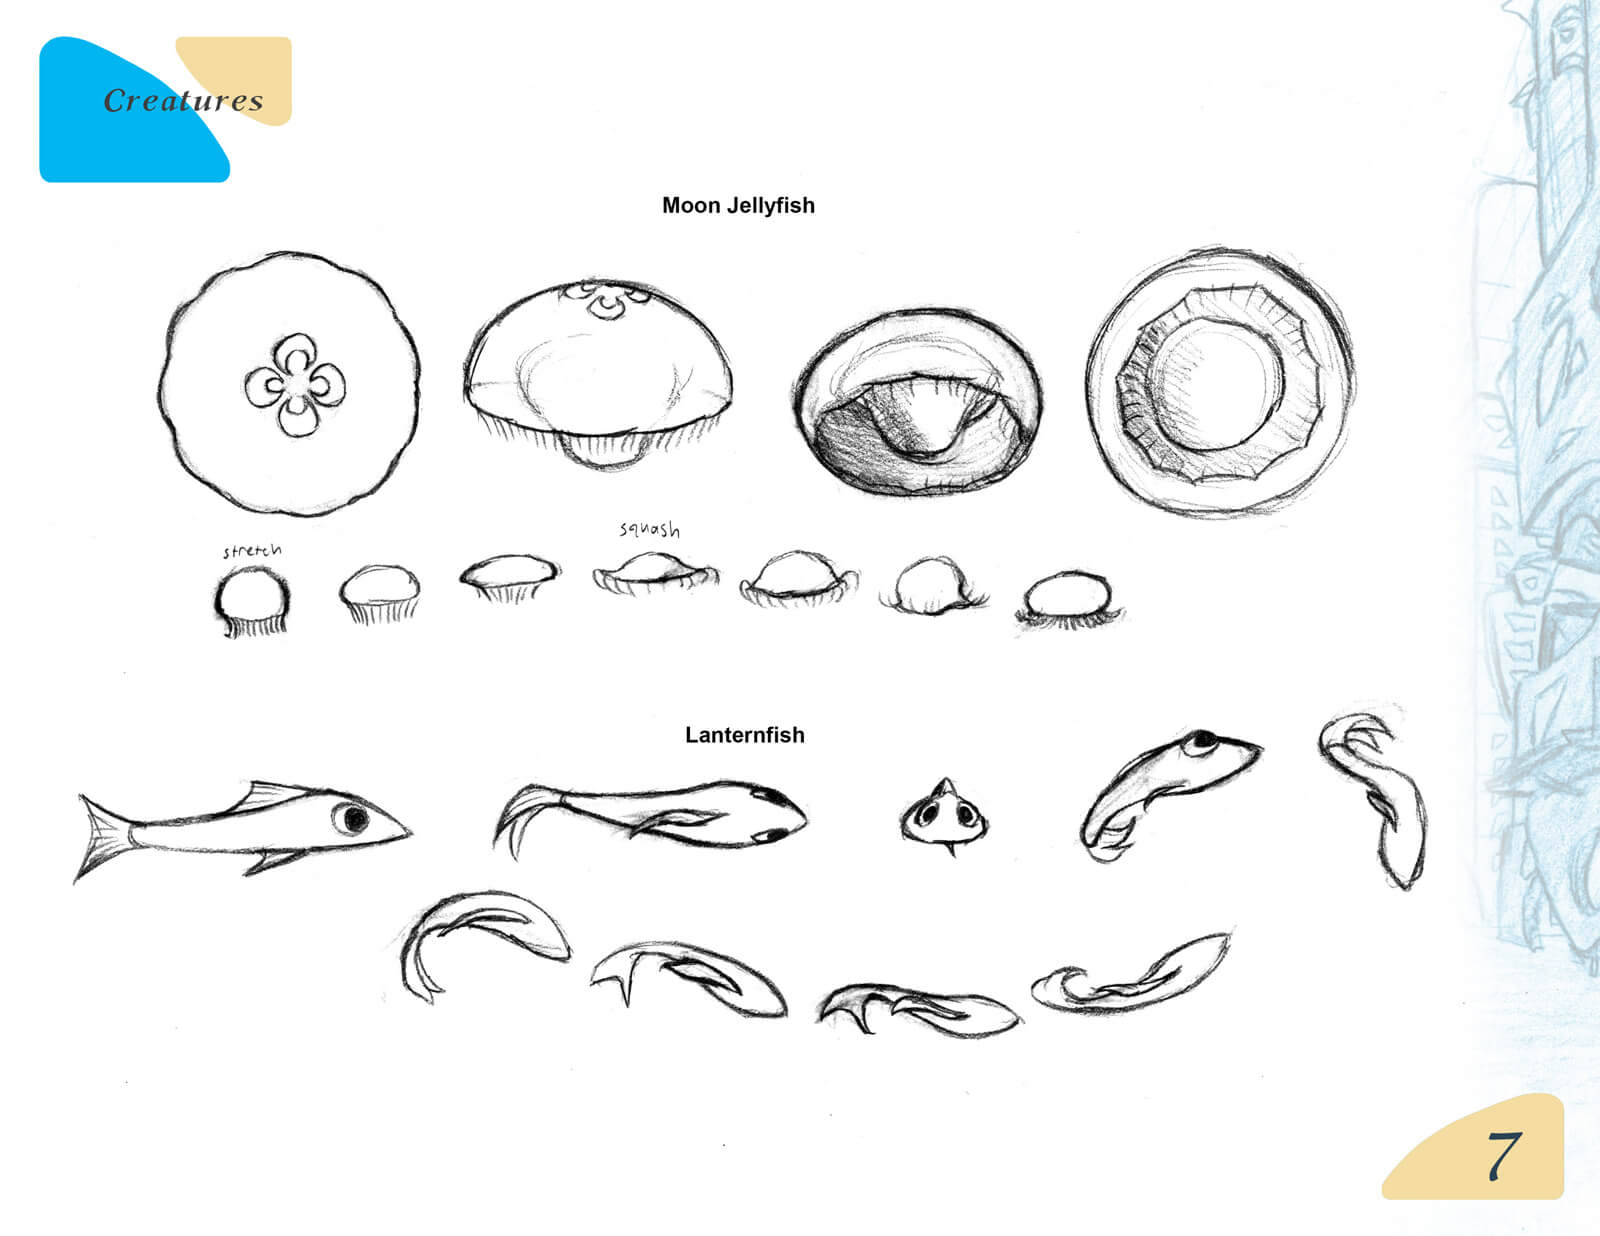 Black-and-white sketches of a moon jellyfish and lanternfish in various poses for the film Beneath the Night Sea